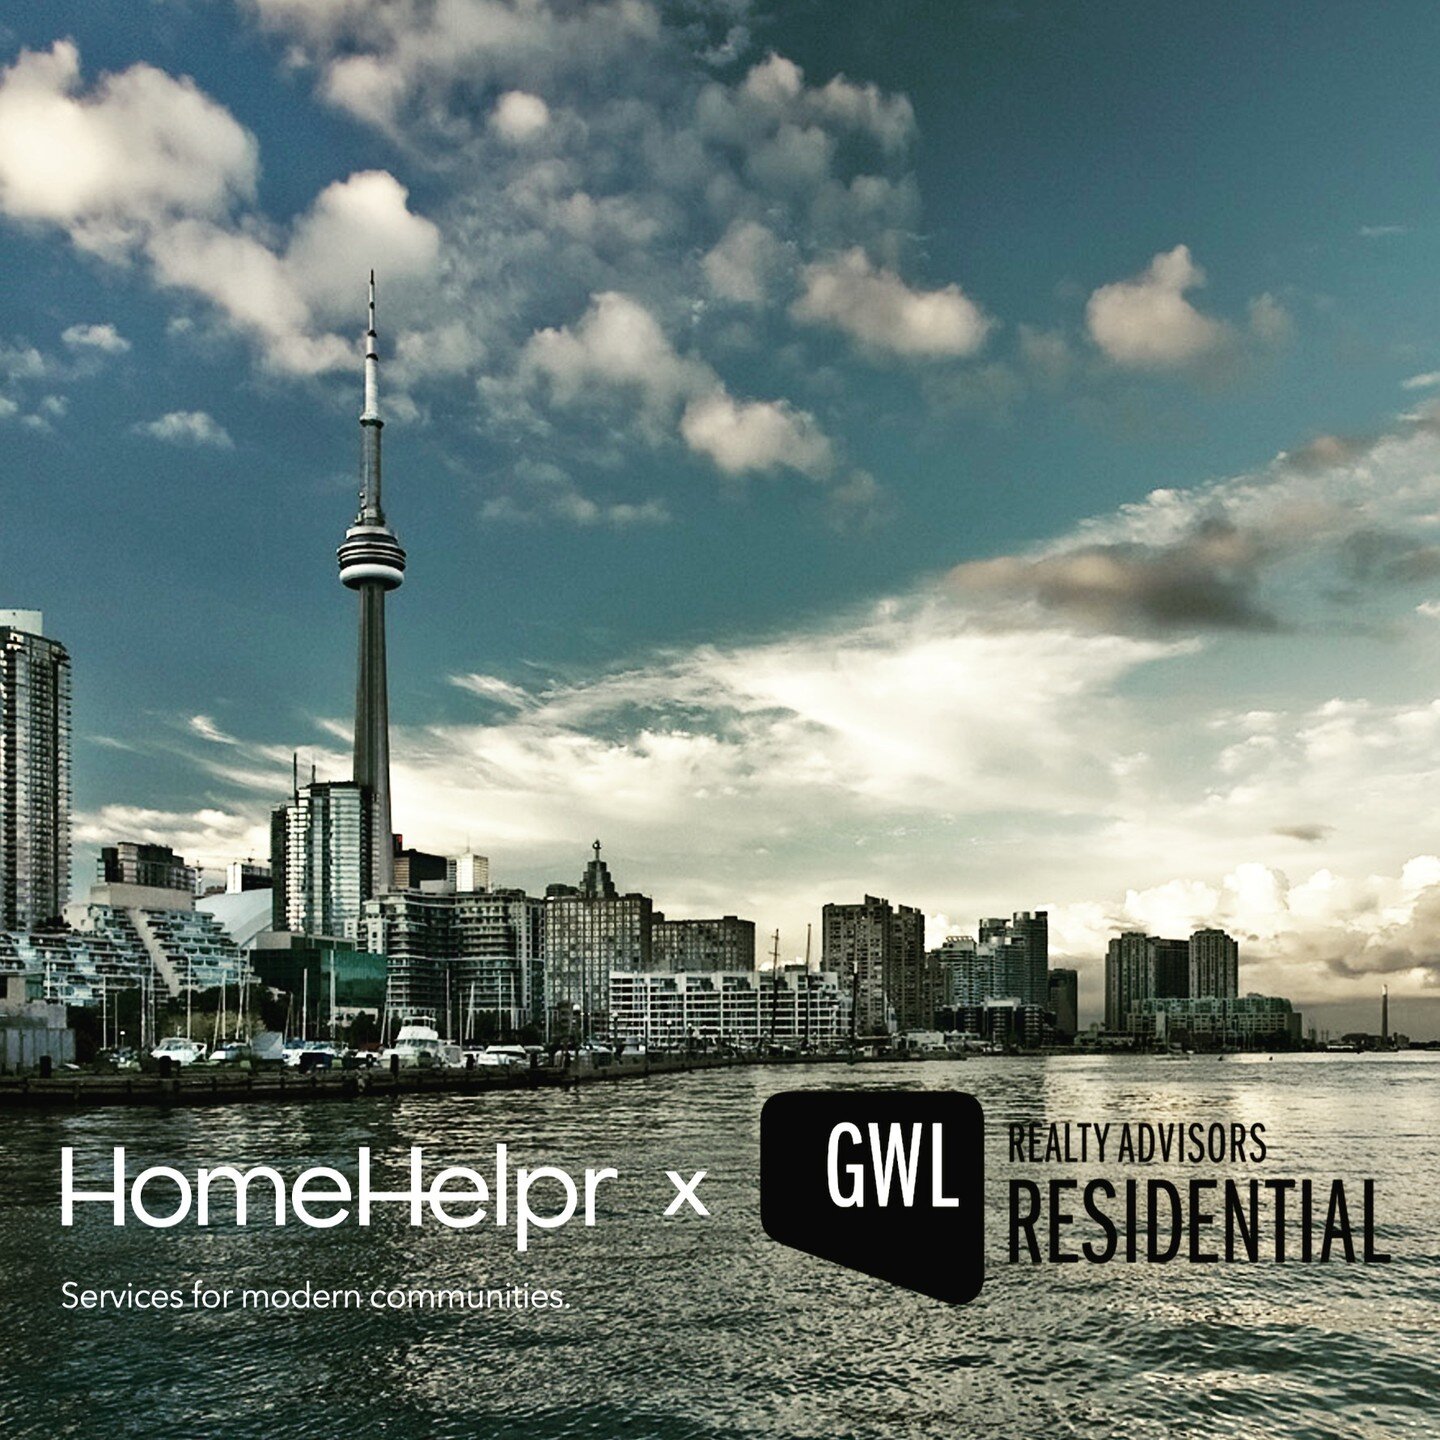 We are so excited to share that we have partnered with GWLRA Residential to bring our suite of helpful services and experiences to all of their Toronto communities. To GWLRA&rsquo;s residents: we are here to help! #mobileservice #Toronto @gwlrareside